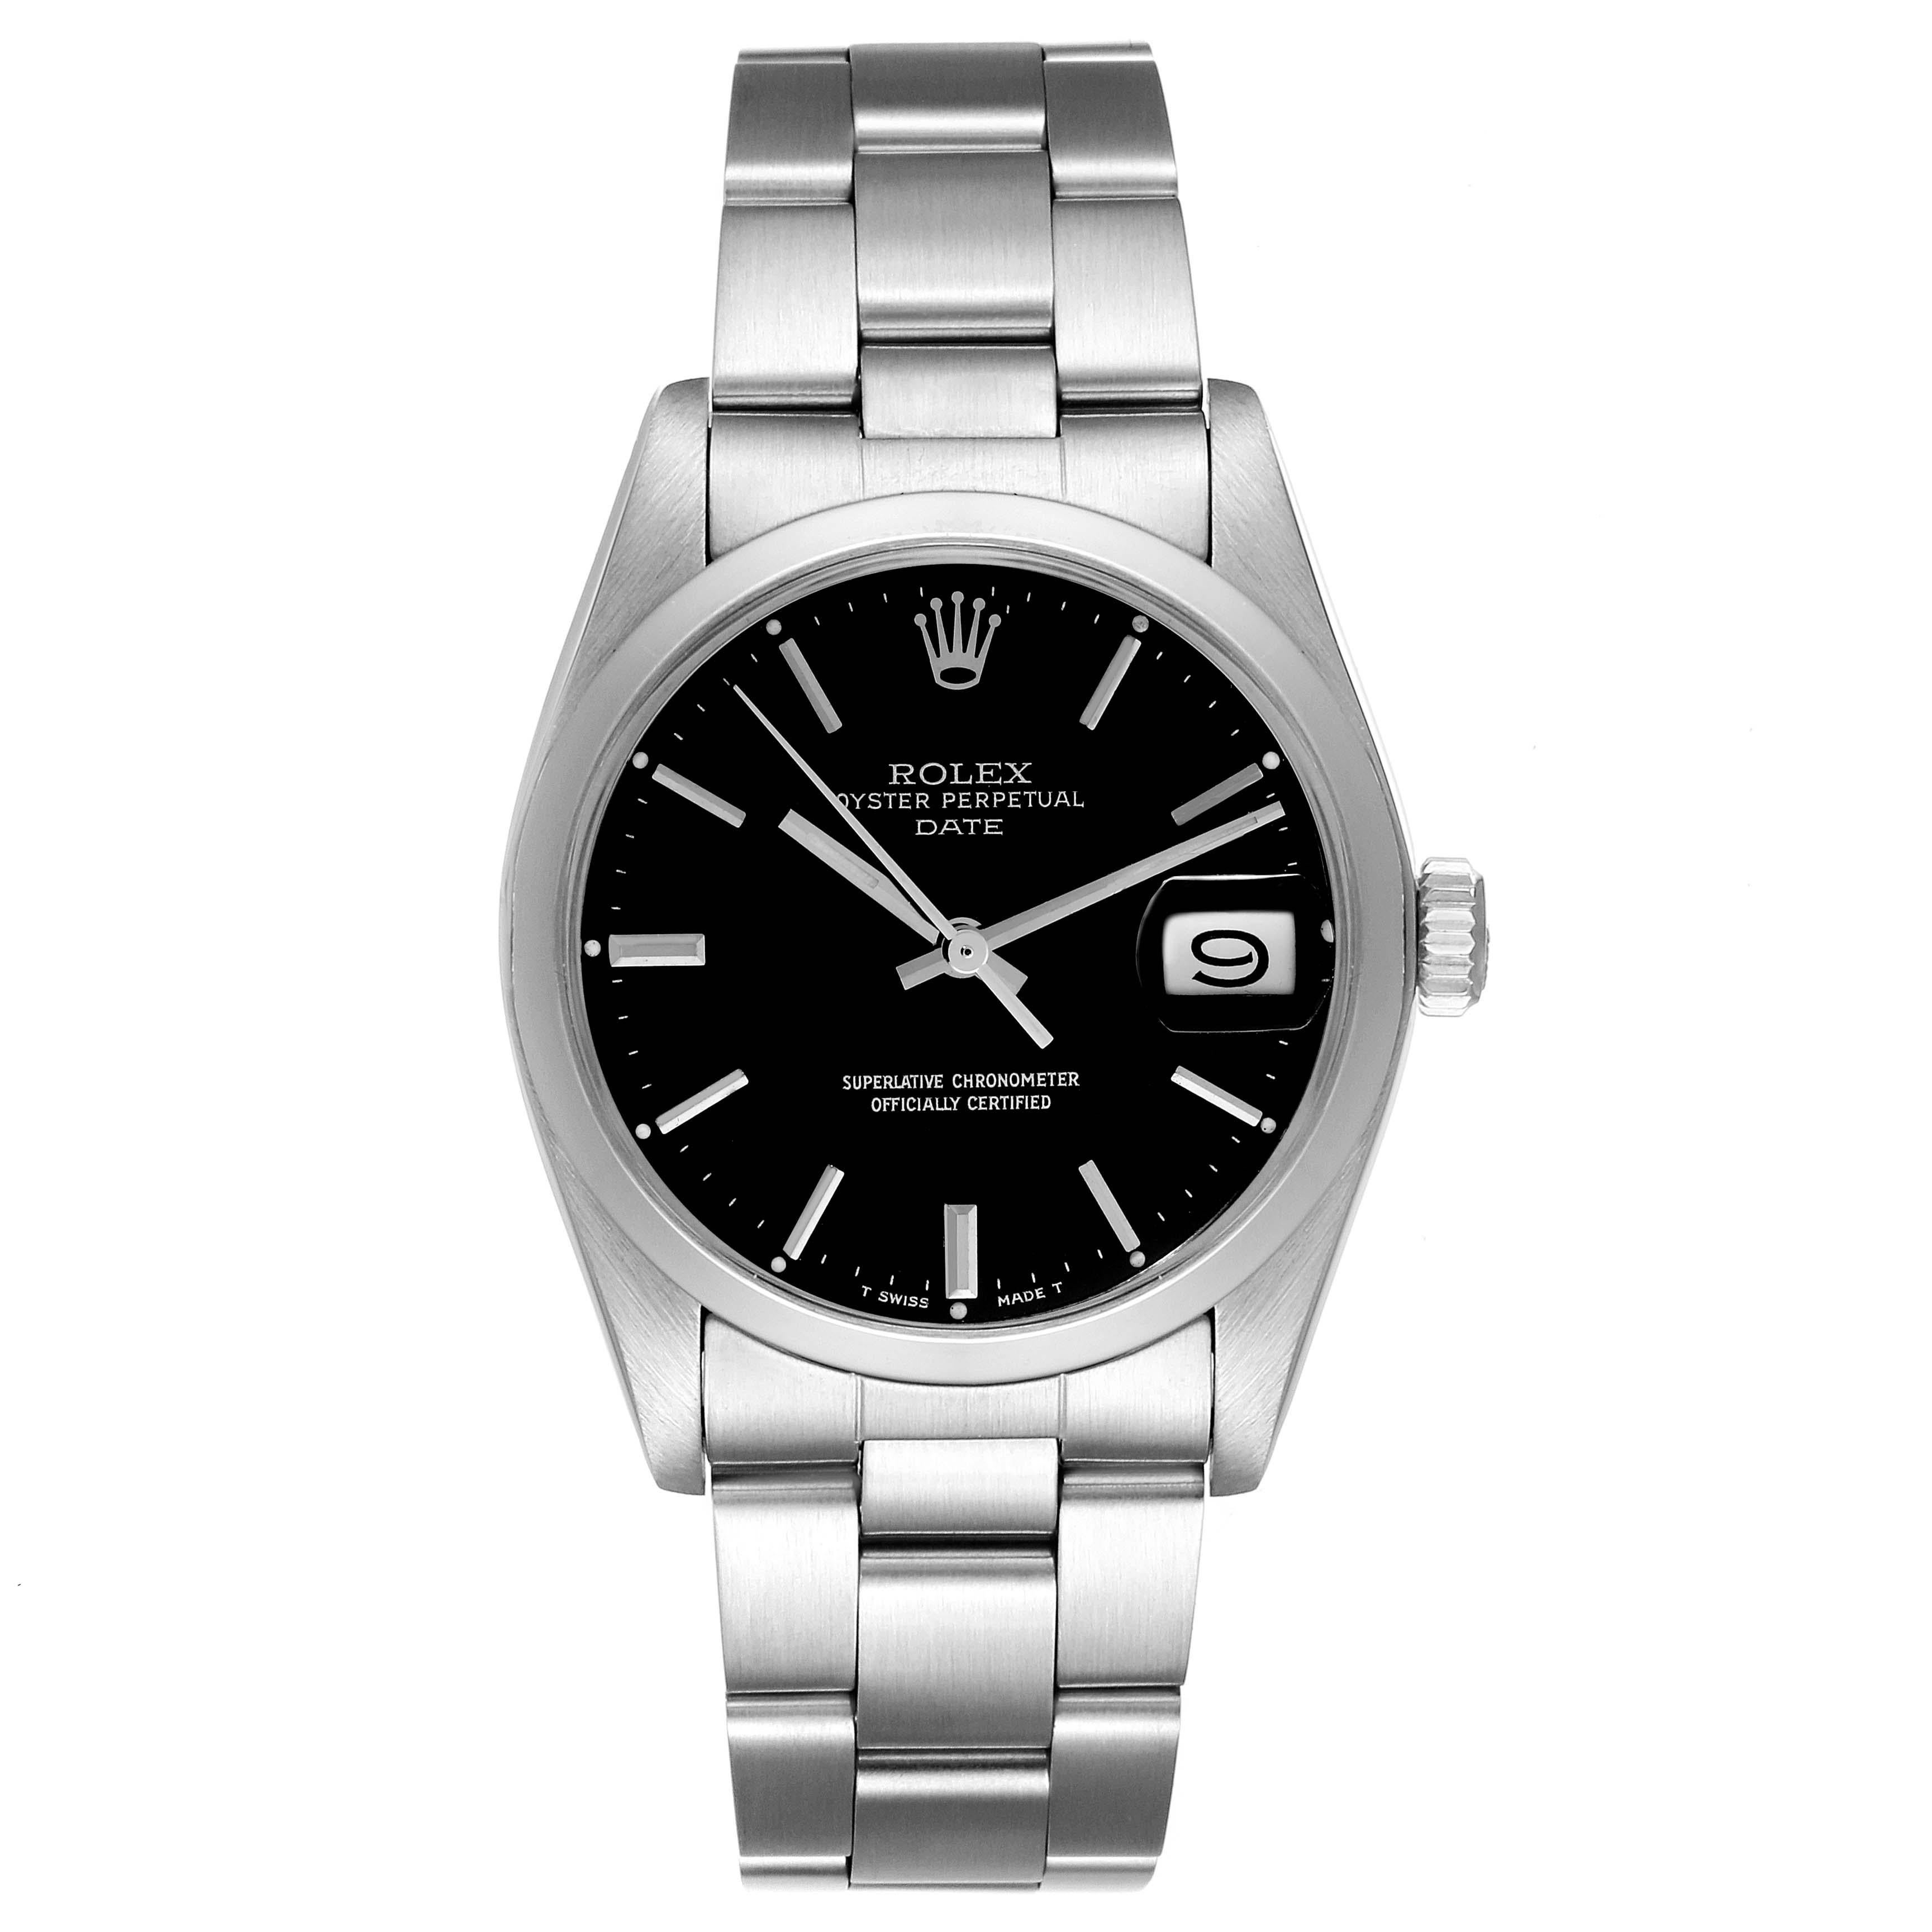 Rolex Date Smooth Bezel Black Dial Steel Vintage Mens Watch 1500. Officially certified chronometer automatic self-winding movement. Stainless steel oyster case 35.0 mm in diameter. Rolex logo on a crown. Stainless steel smooth domed bezel. Acrylic